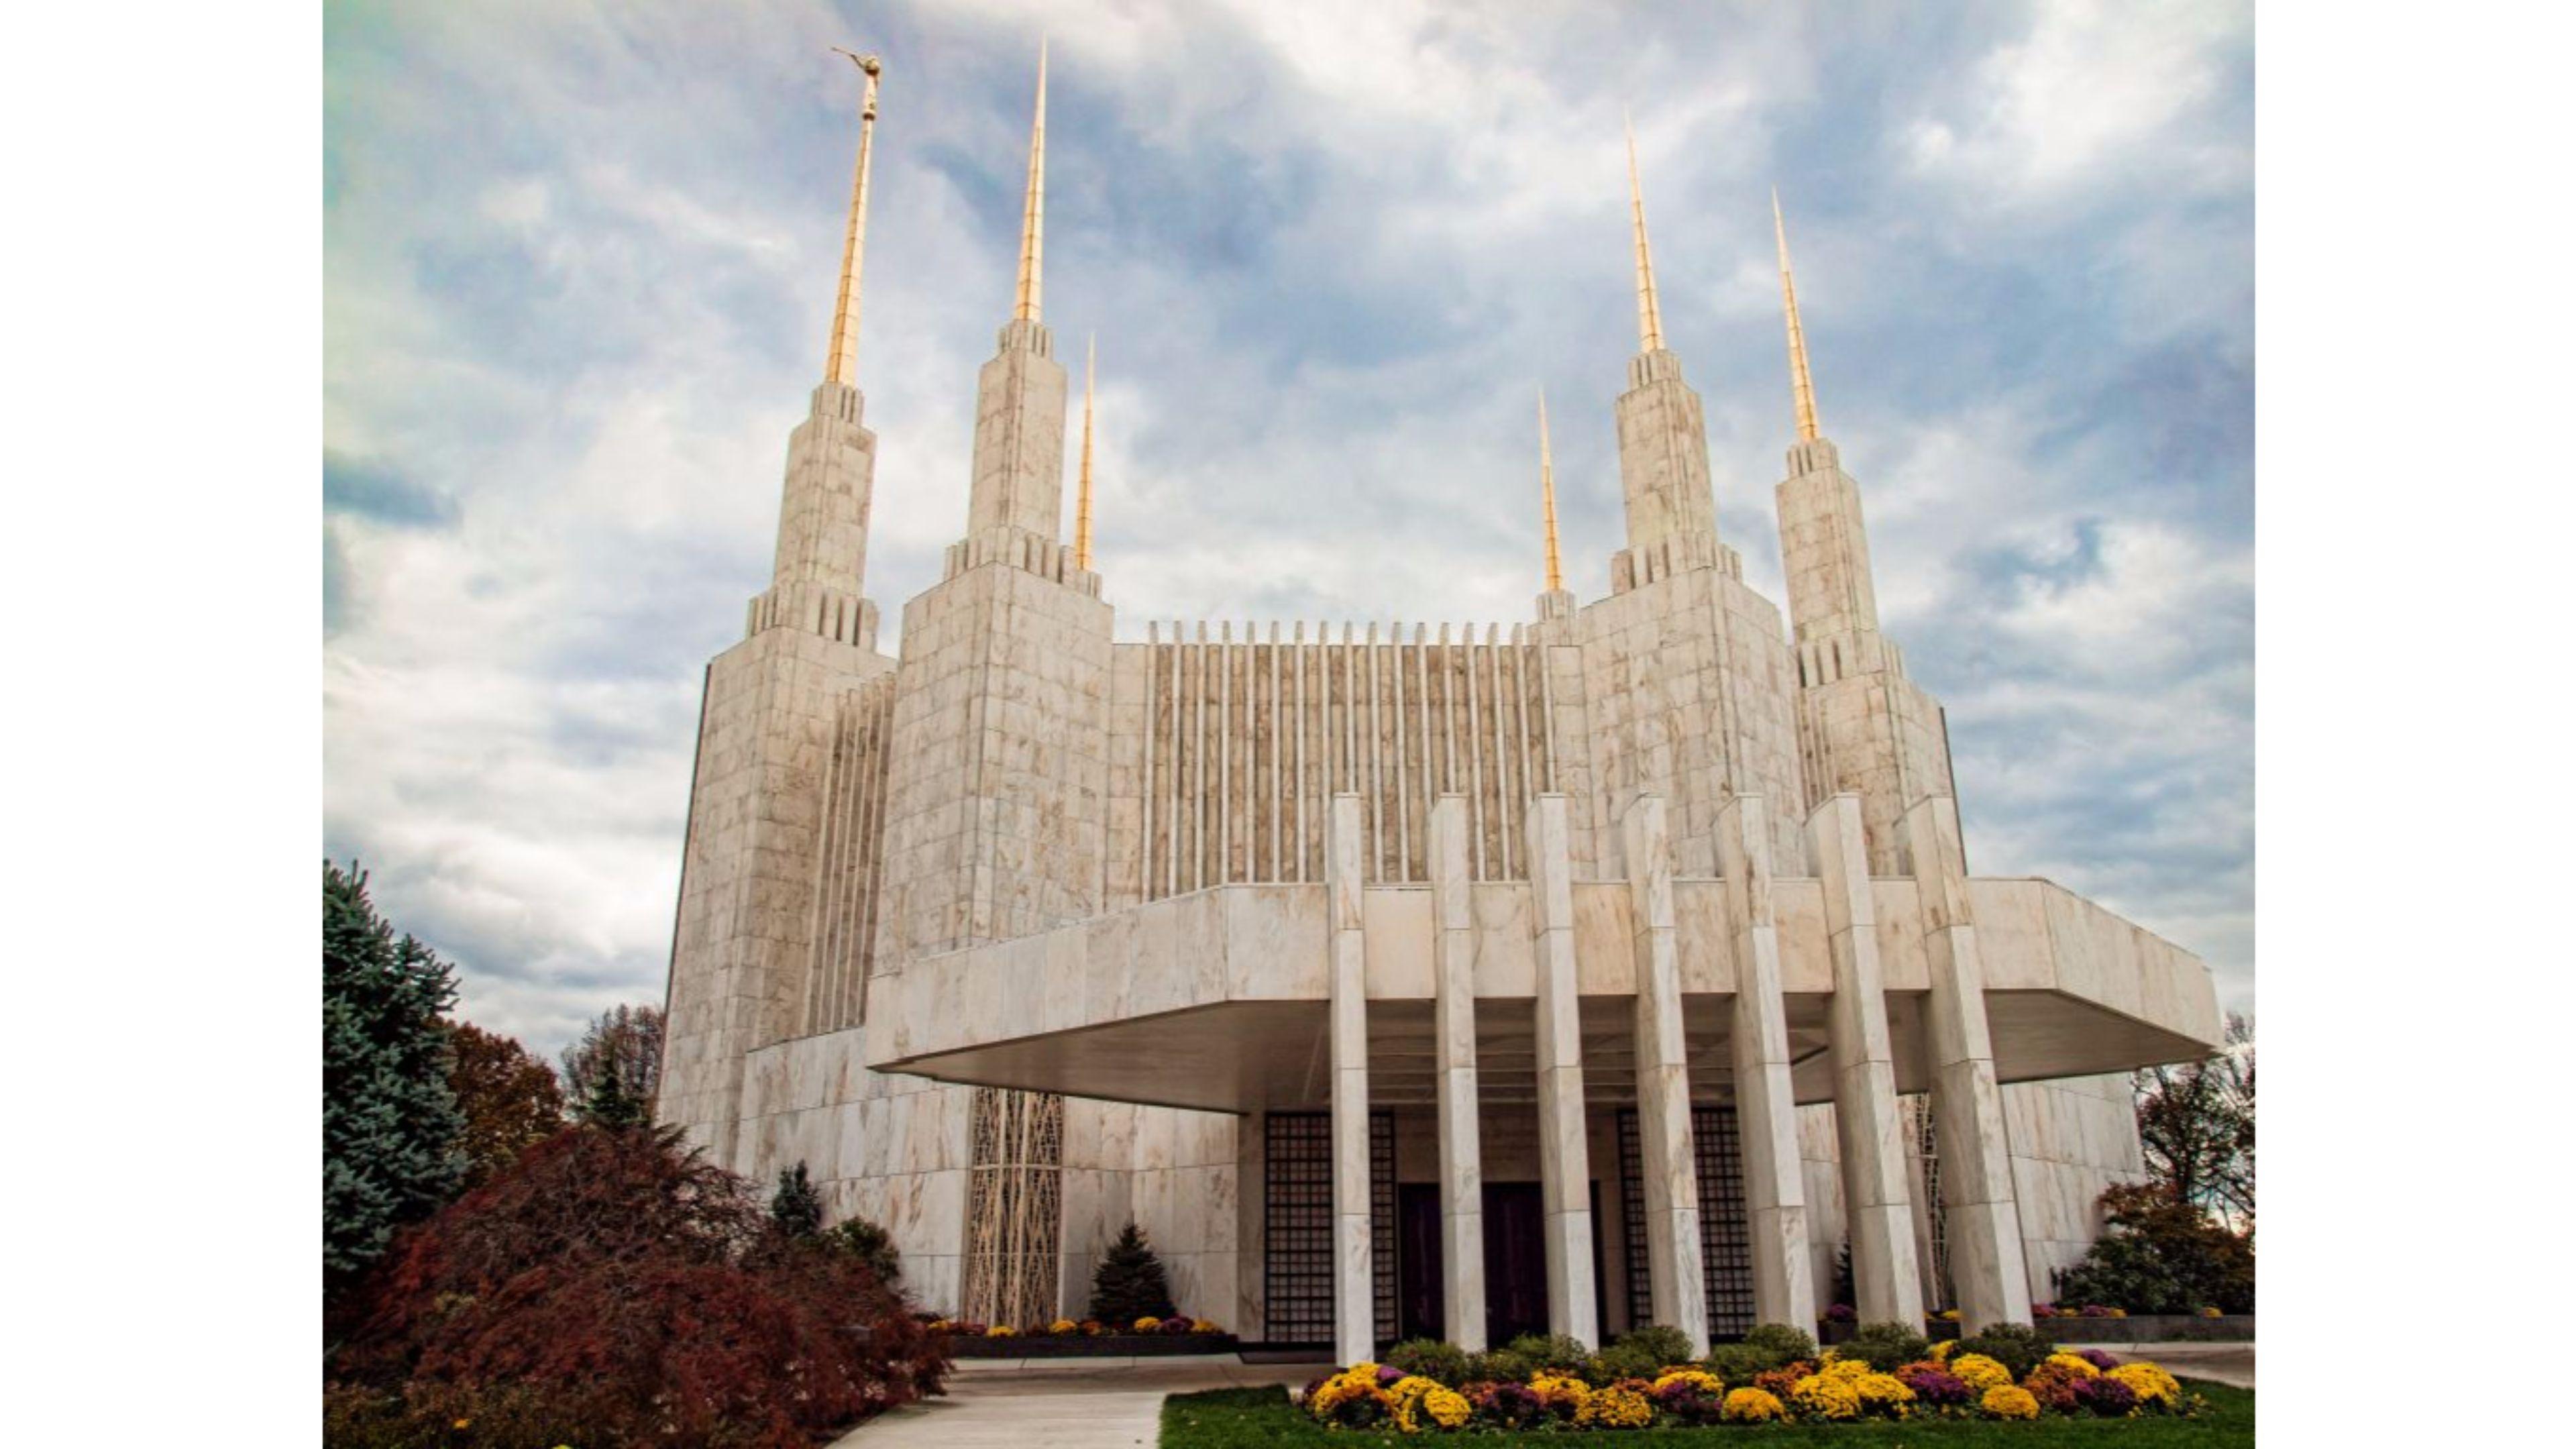 Lds Temple Wallpapers Top Free Lds Temple Backgrounds Images, Photos, Reviews